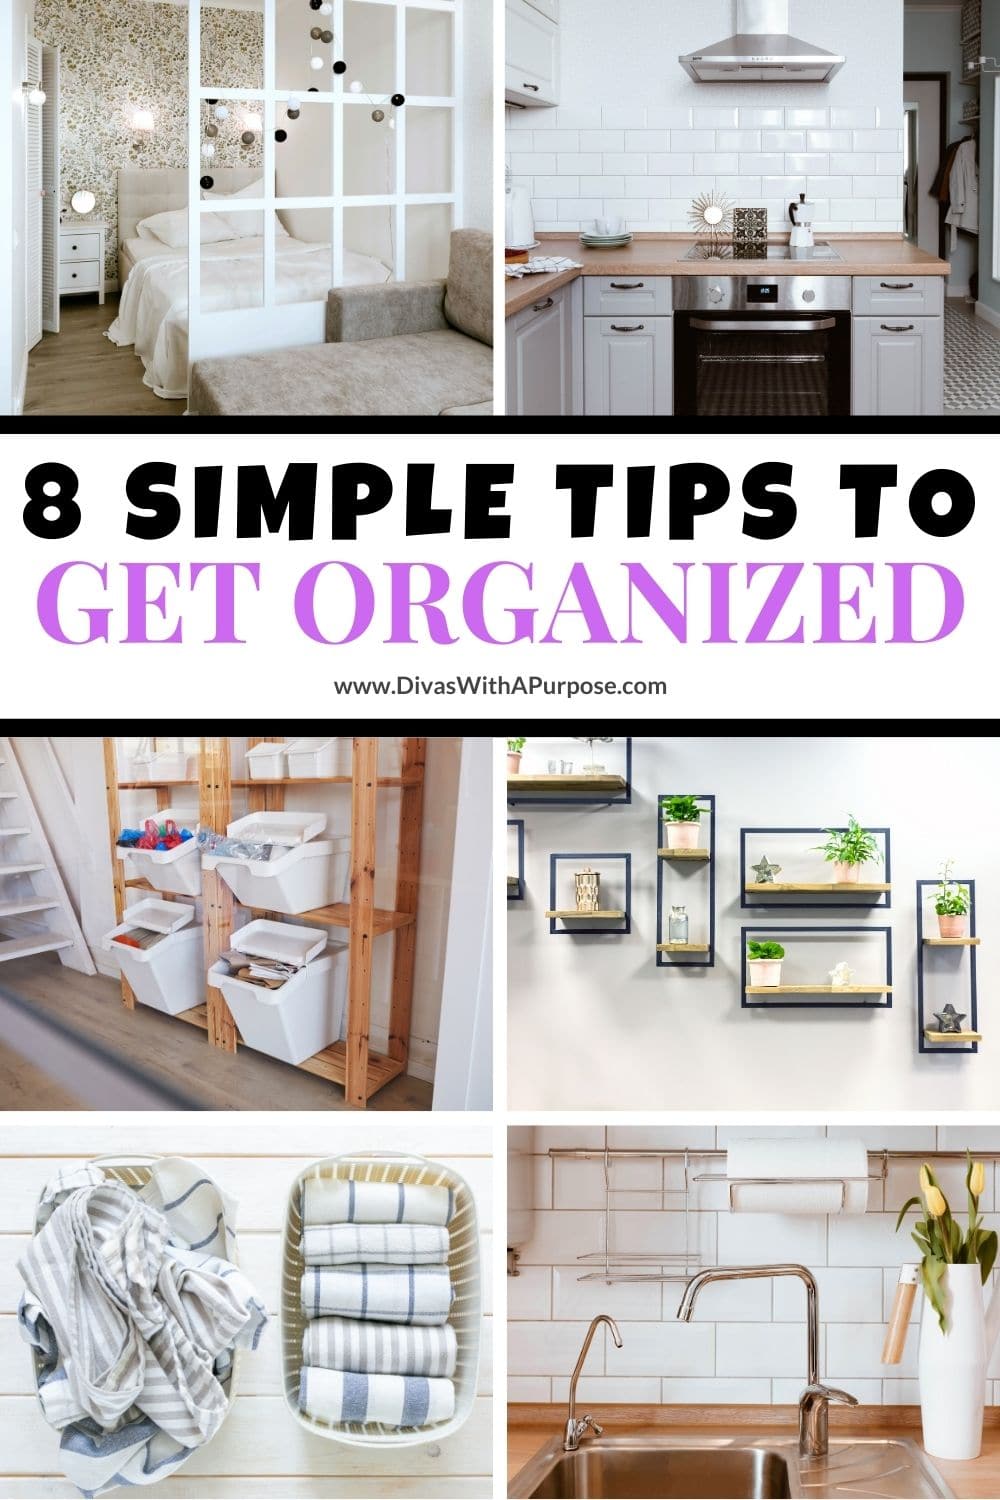 Contrary to popular belief, organized people are not just born that way. They use a variety of tools and methods to help them. Over time it becomes easier to implement what works best for them and their specific needs.